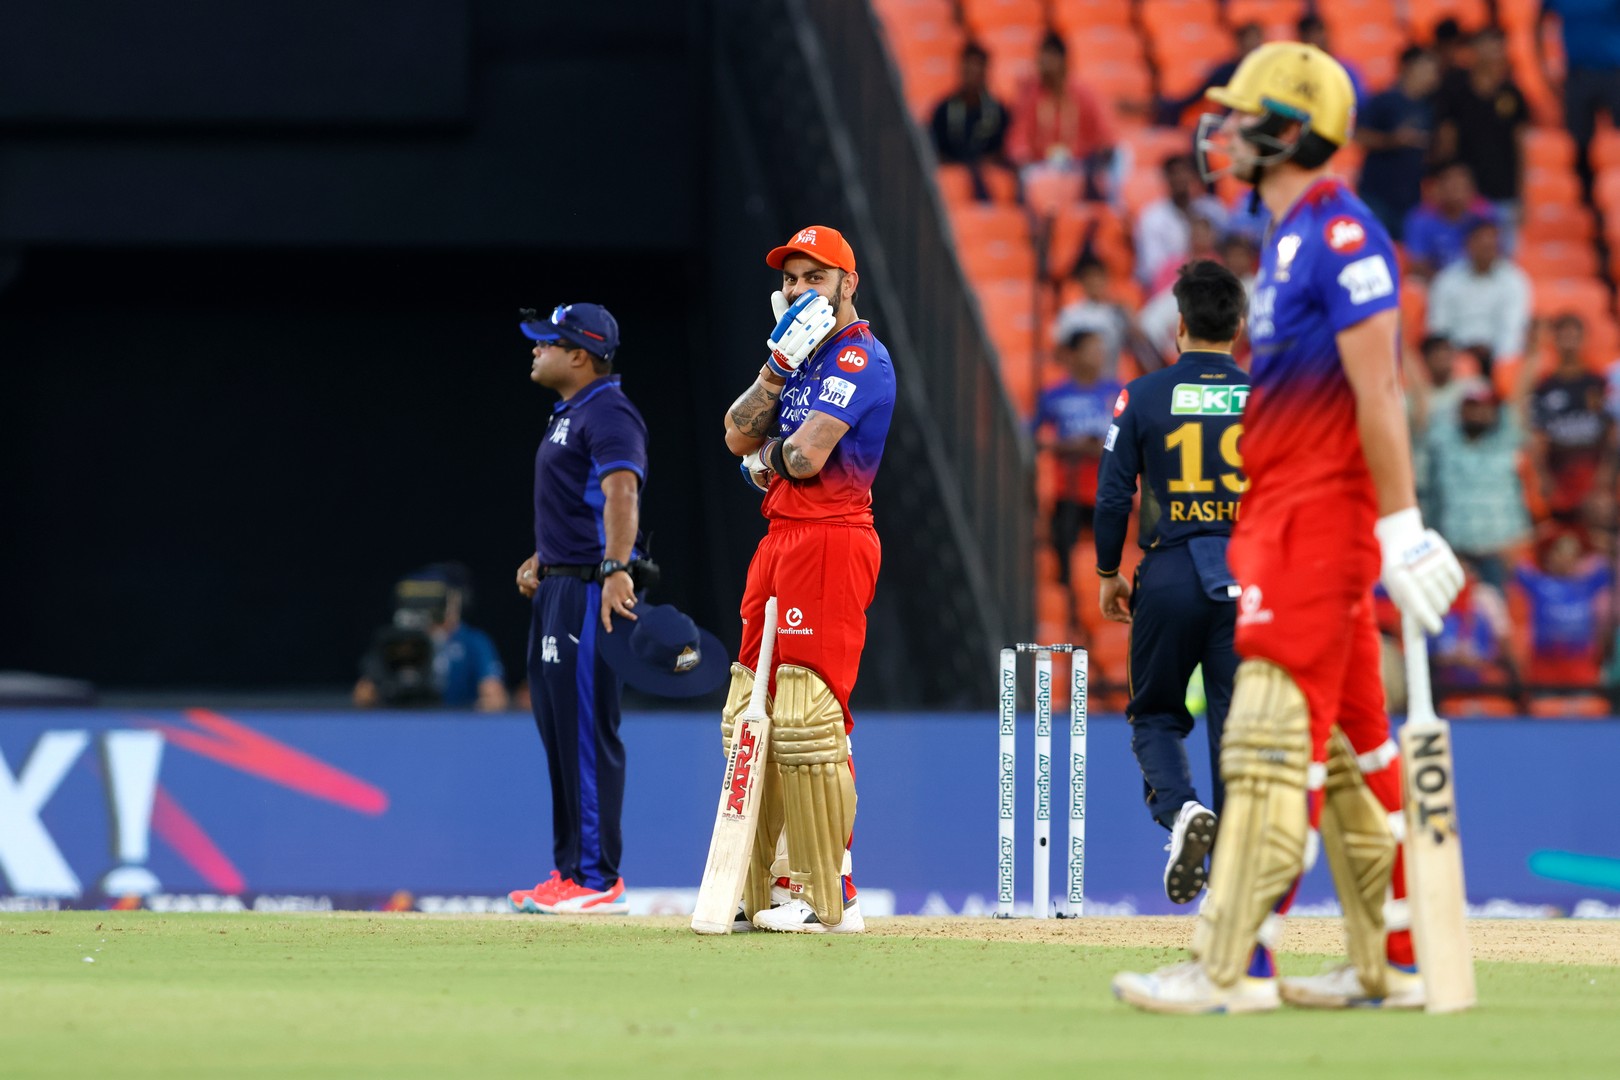 RCB won by 9 wickets